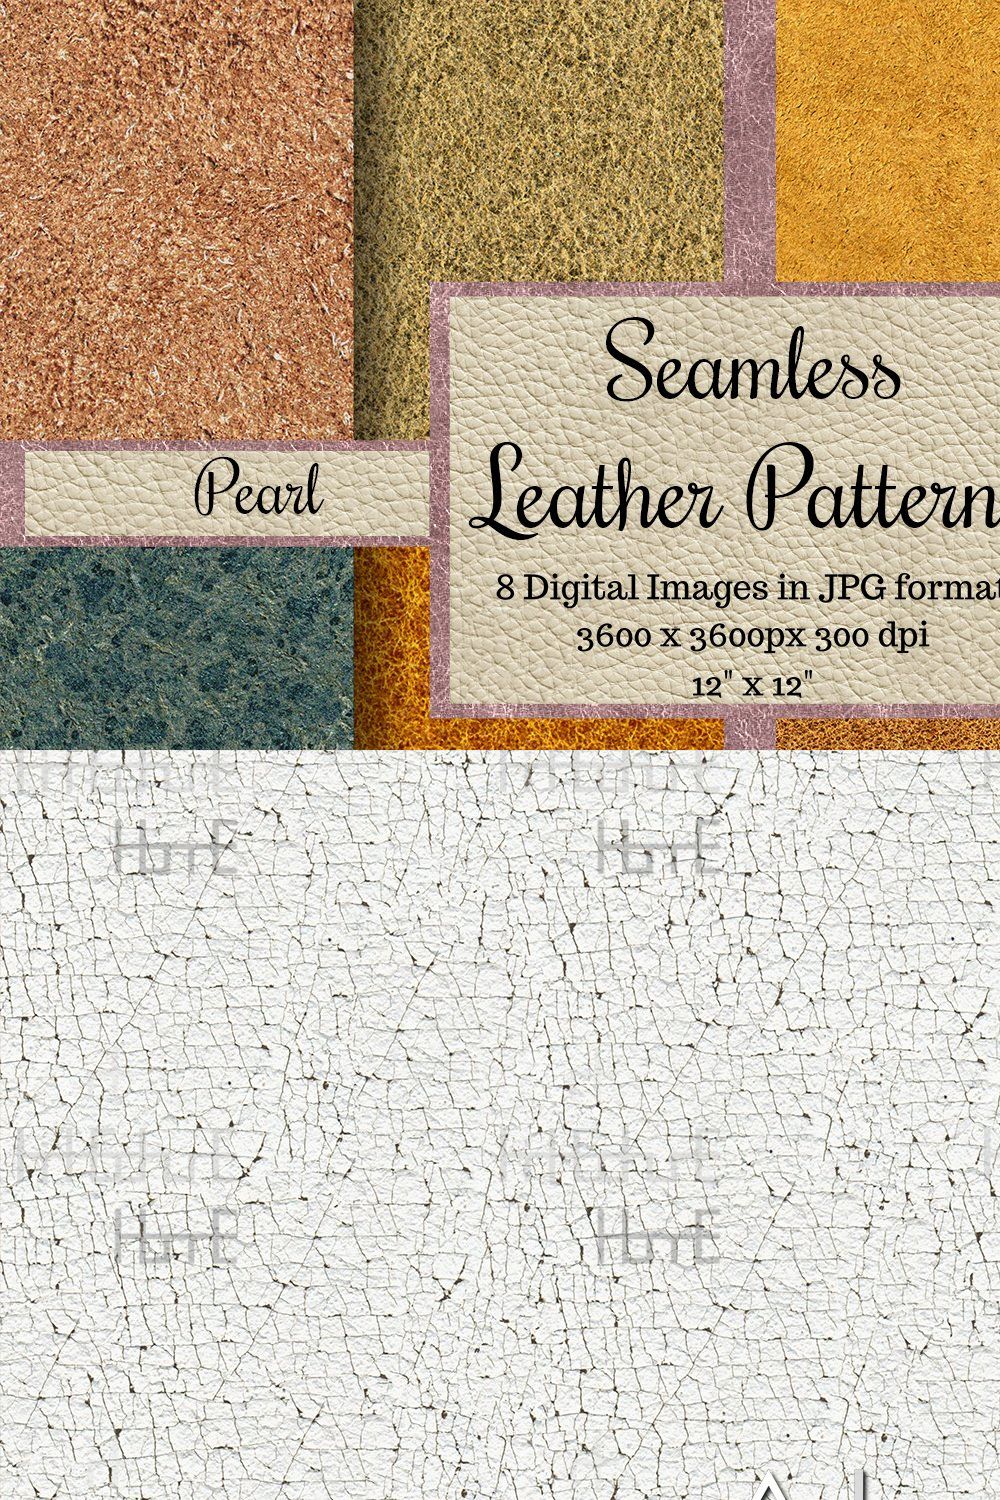 Seamless Leather Patterns - Pearl pinterest preview image.